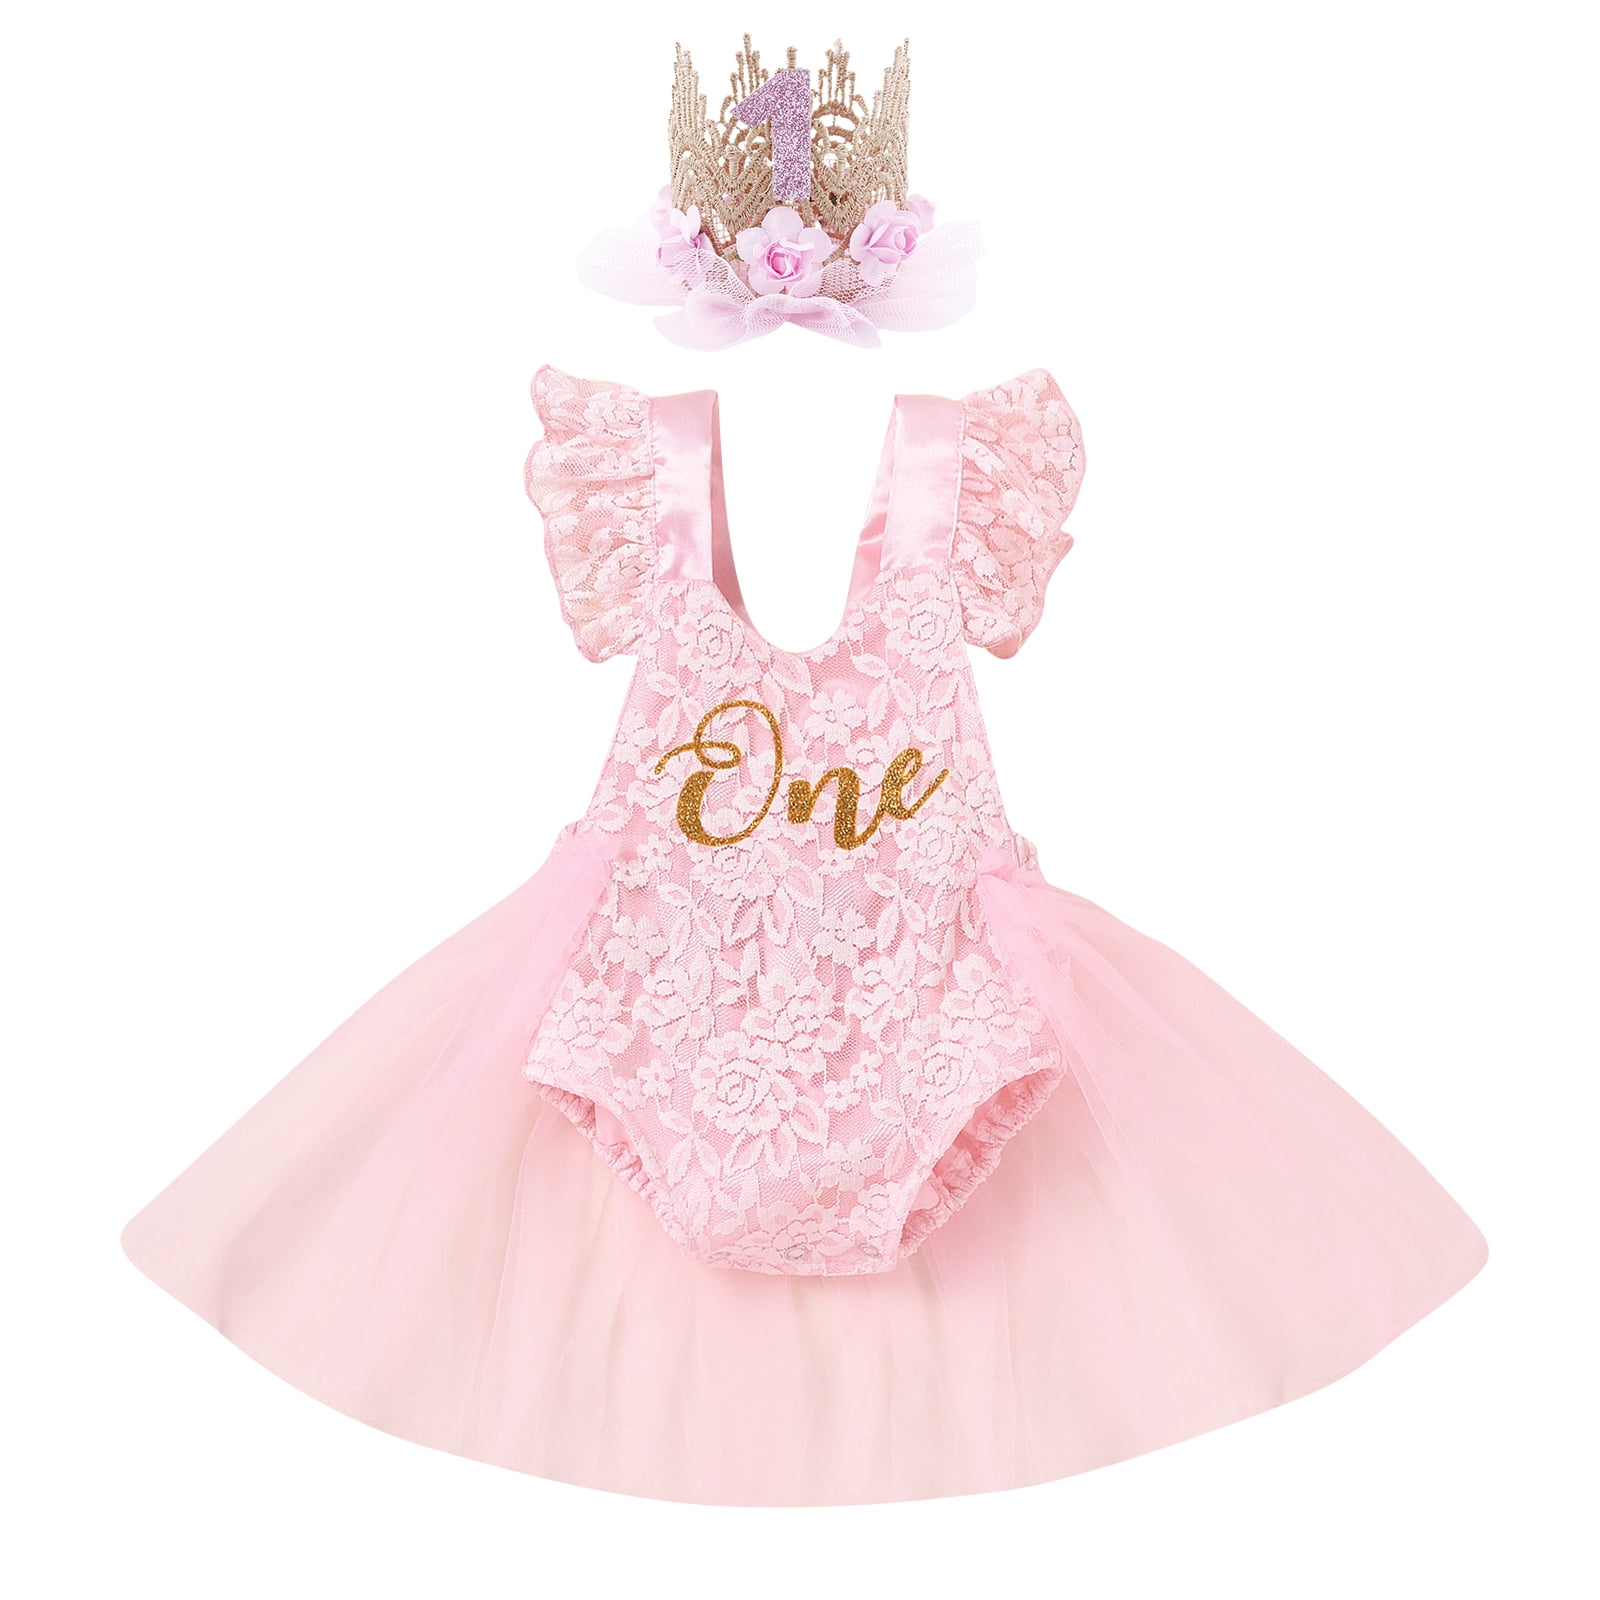 IBTOM CASTLE Baby Girl 1st Birthday Outfit Lace Tulle Romper Princess Tutu  Dress Headband Shiny One Cake Smash Photo Shoot Clothes 12-18 Months Pink